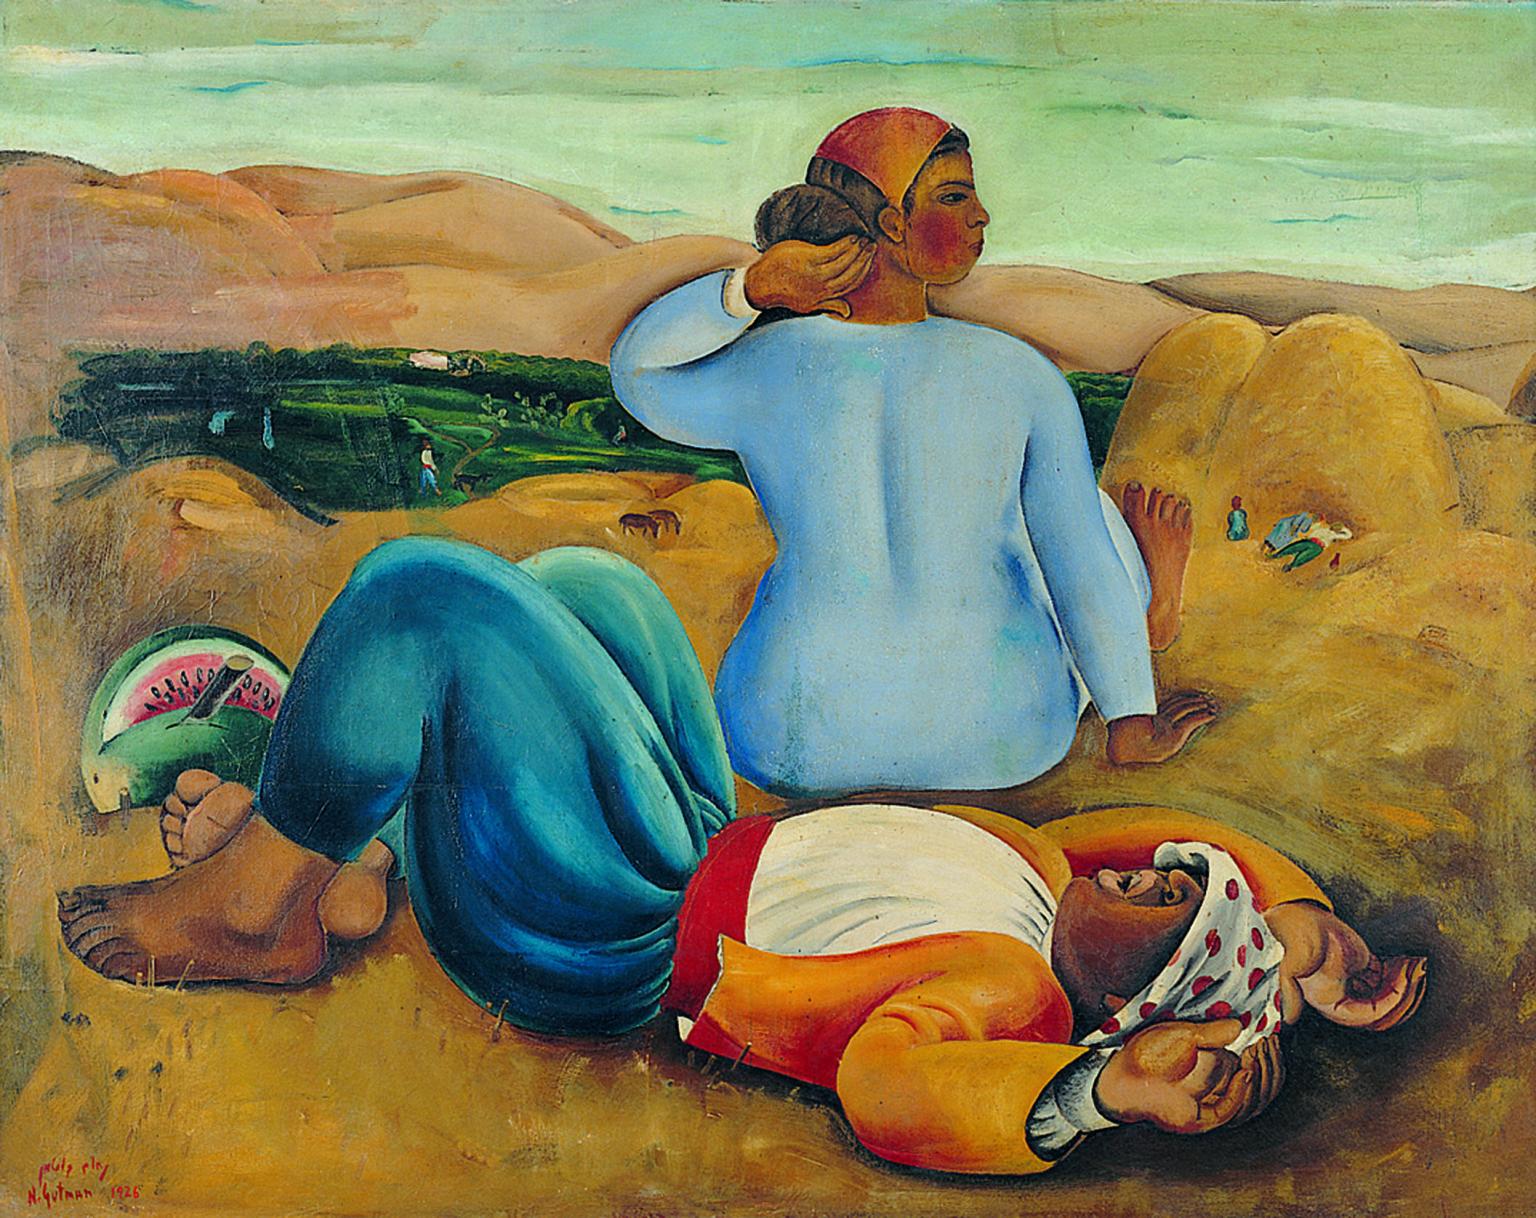 Painting of man laying on ground with watermelon at his feet and woman facing away from viewer towards hills in the background. 